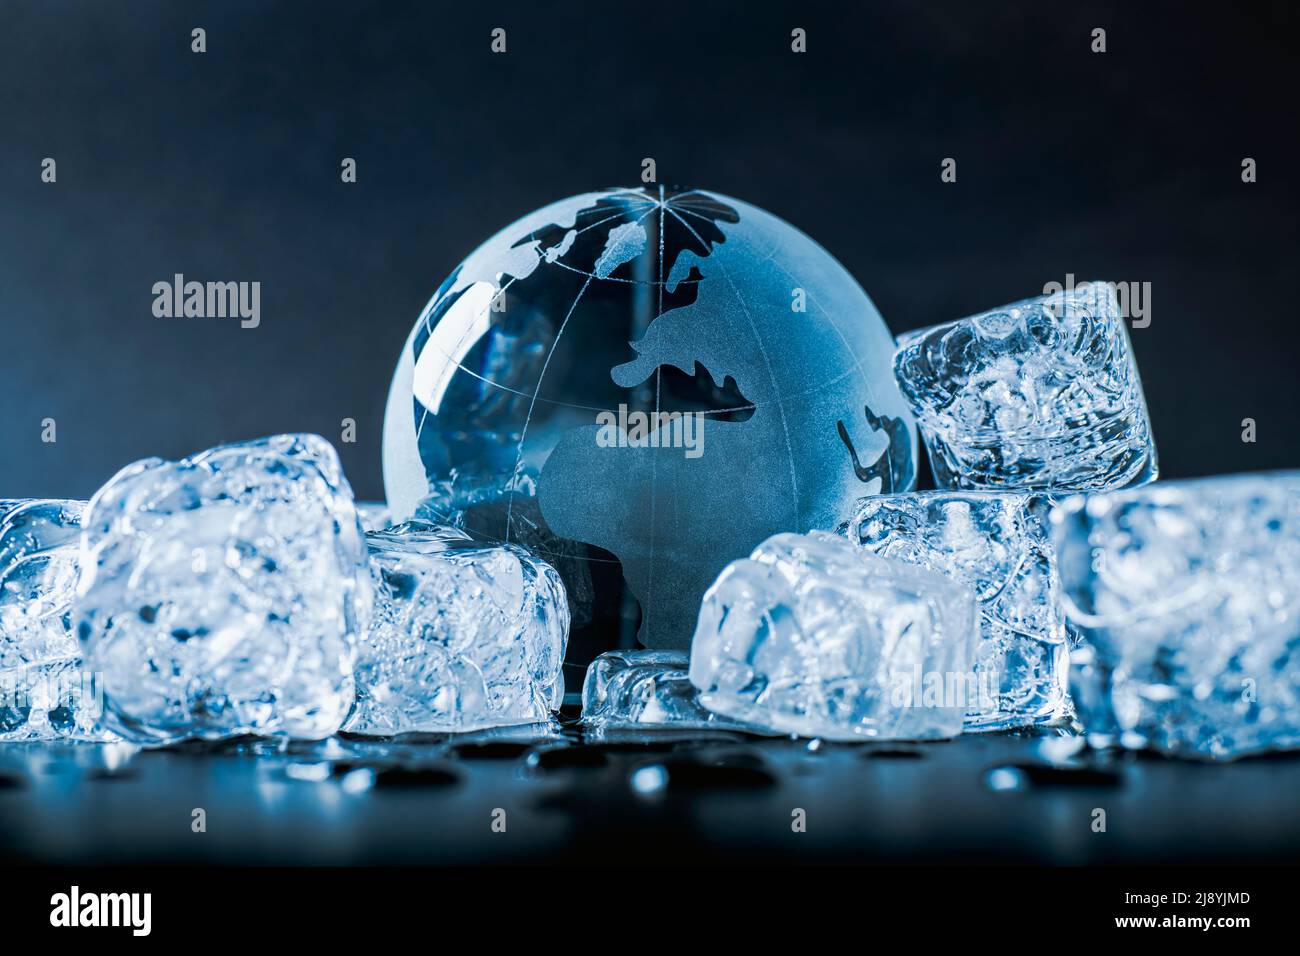 Globe is surrounded by ice cubes symbolizing new geological or political ice age Stock Photo